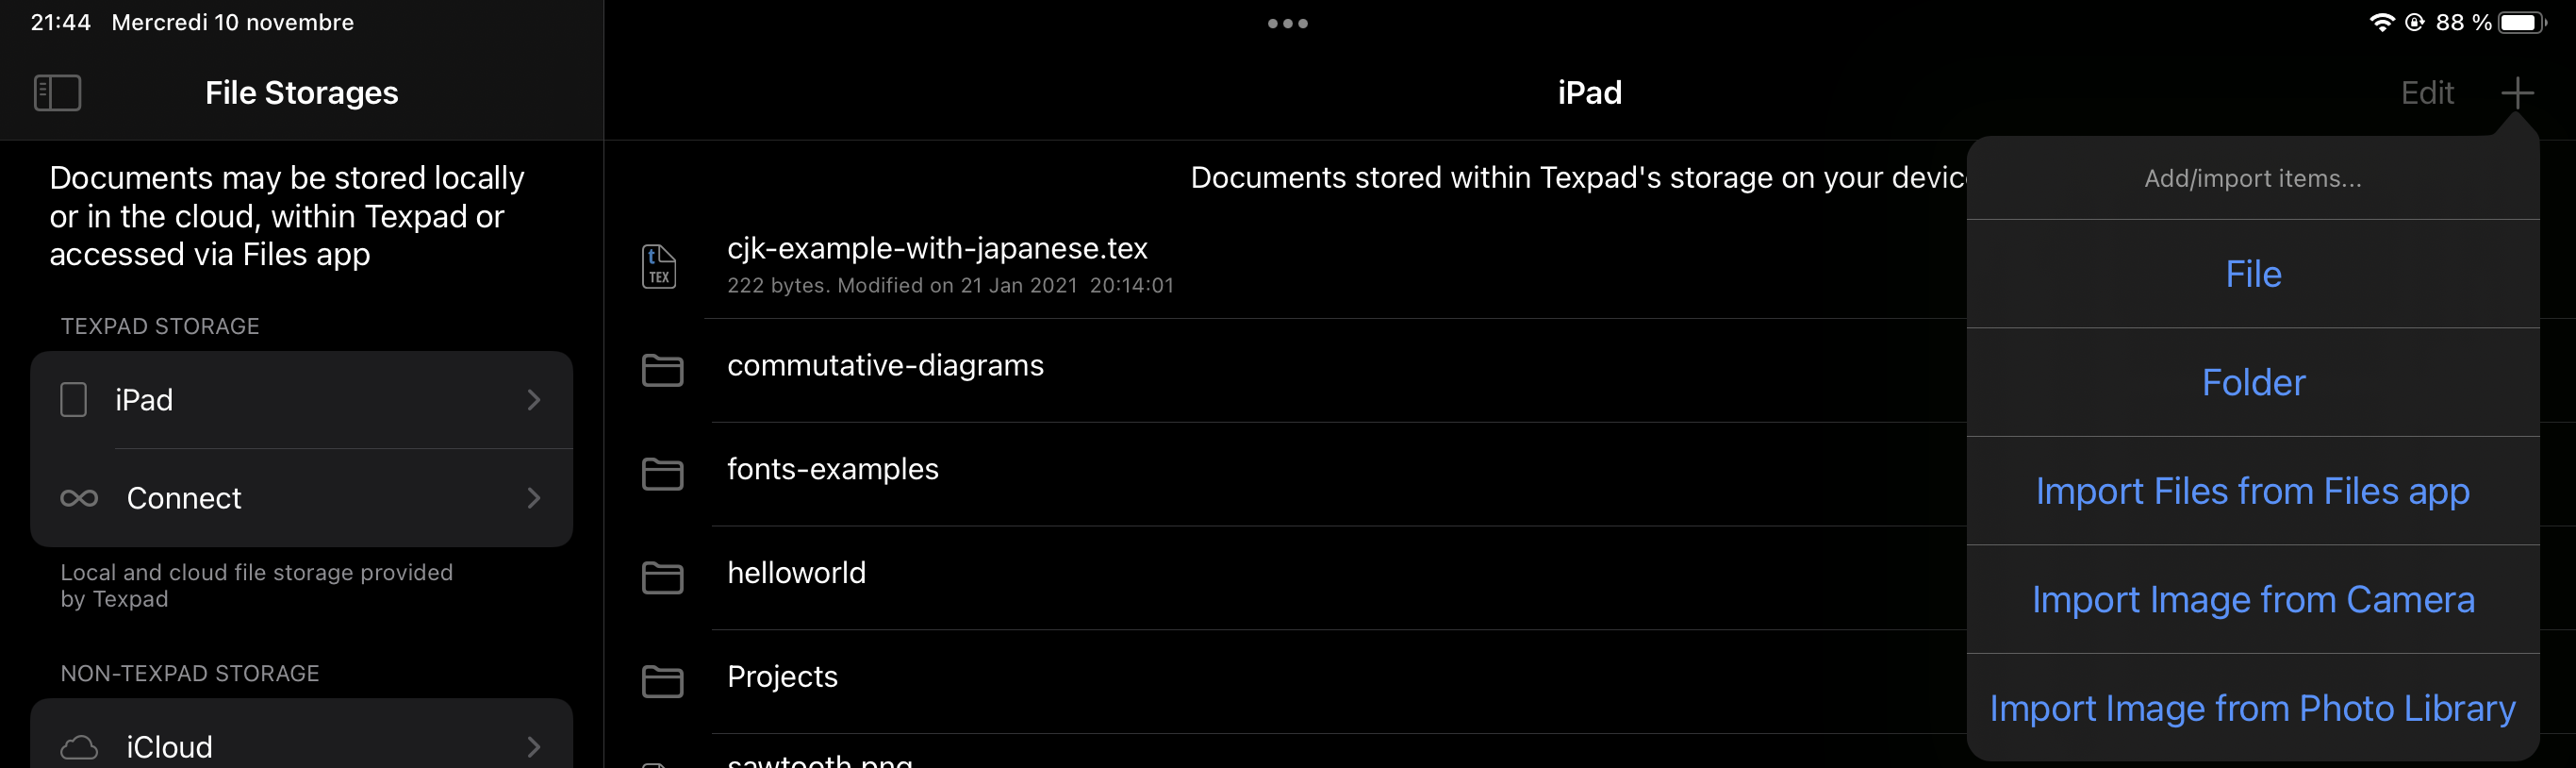 docs/apps/typesetting/examples/creating-images/folder-view-add-menu_ios_ipad_dark-mode.png